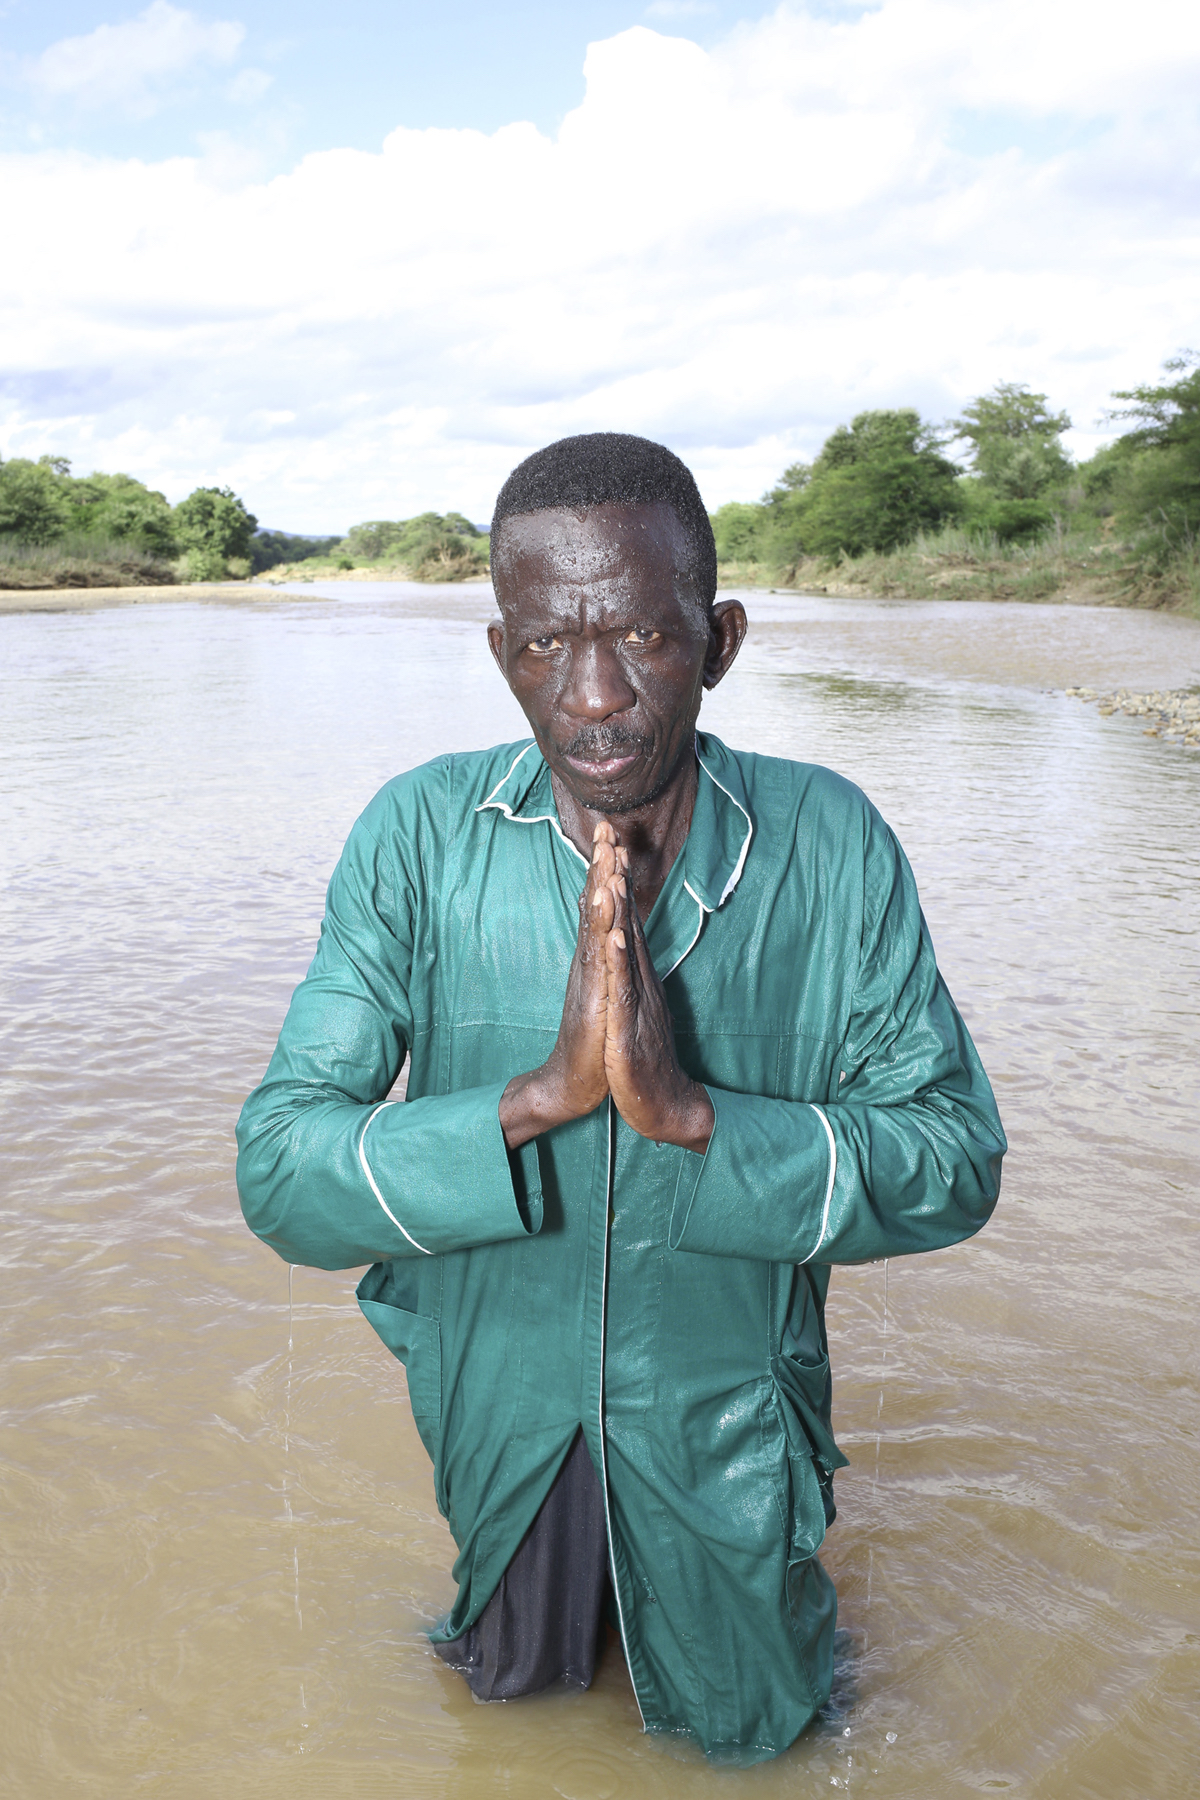 Giya Makondo-Wills, “They Came From The Water While The World Watched” – middle-aged man with a wet long green robe standing in a river and holding his hands in prayer